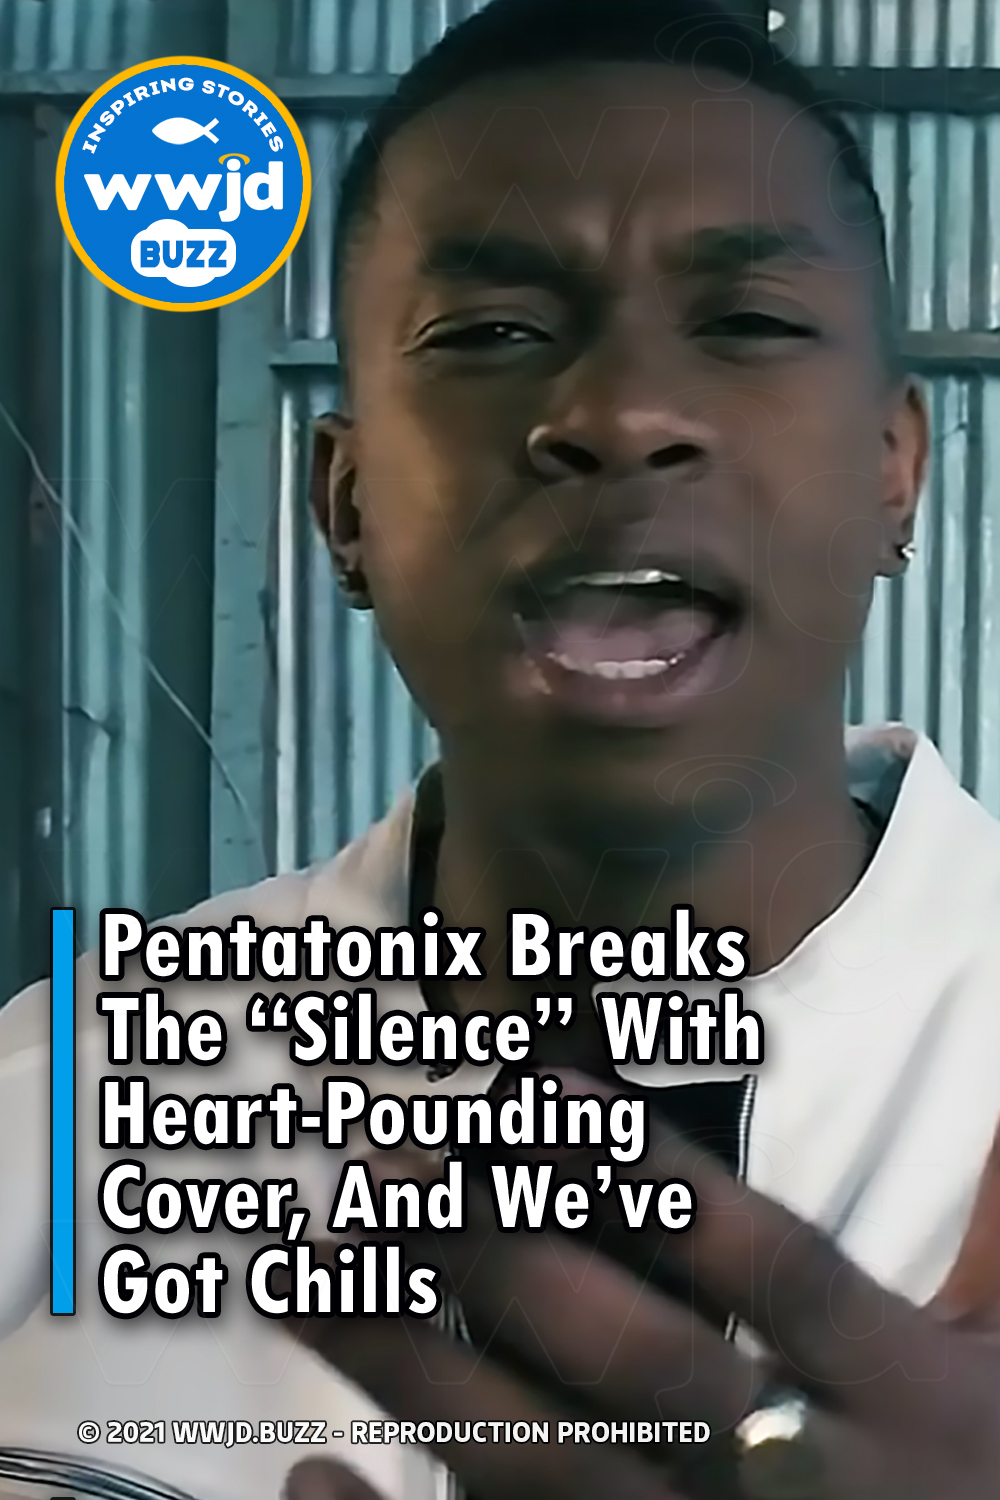 Pentatonix Breaks The “Silence” With Heart-Pounding Cover, And We’ve Got Chills